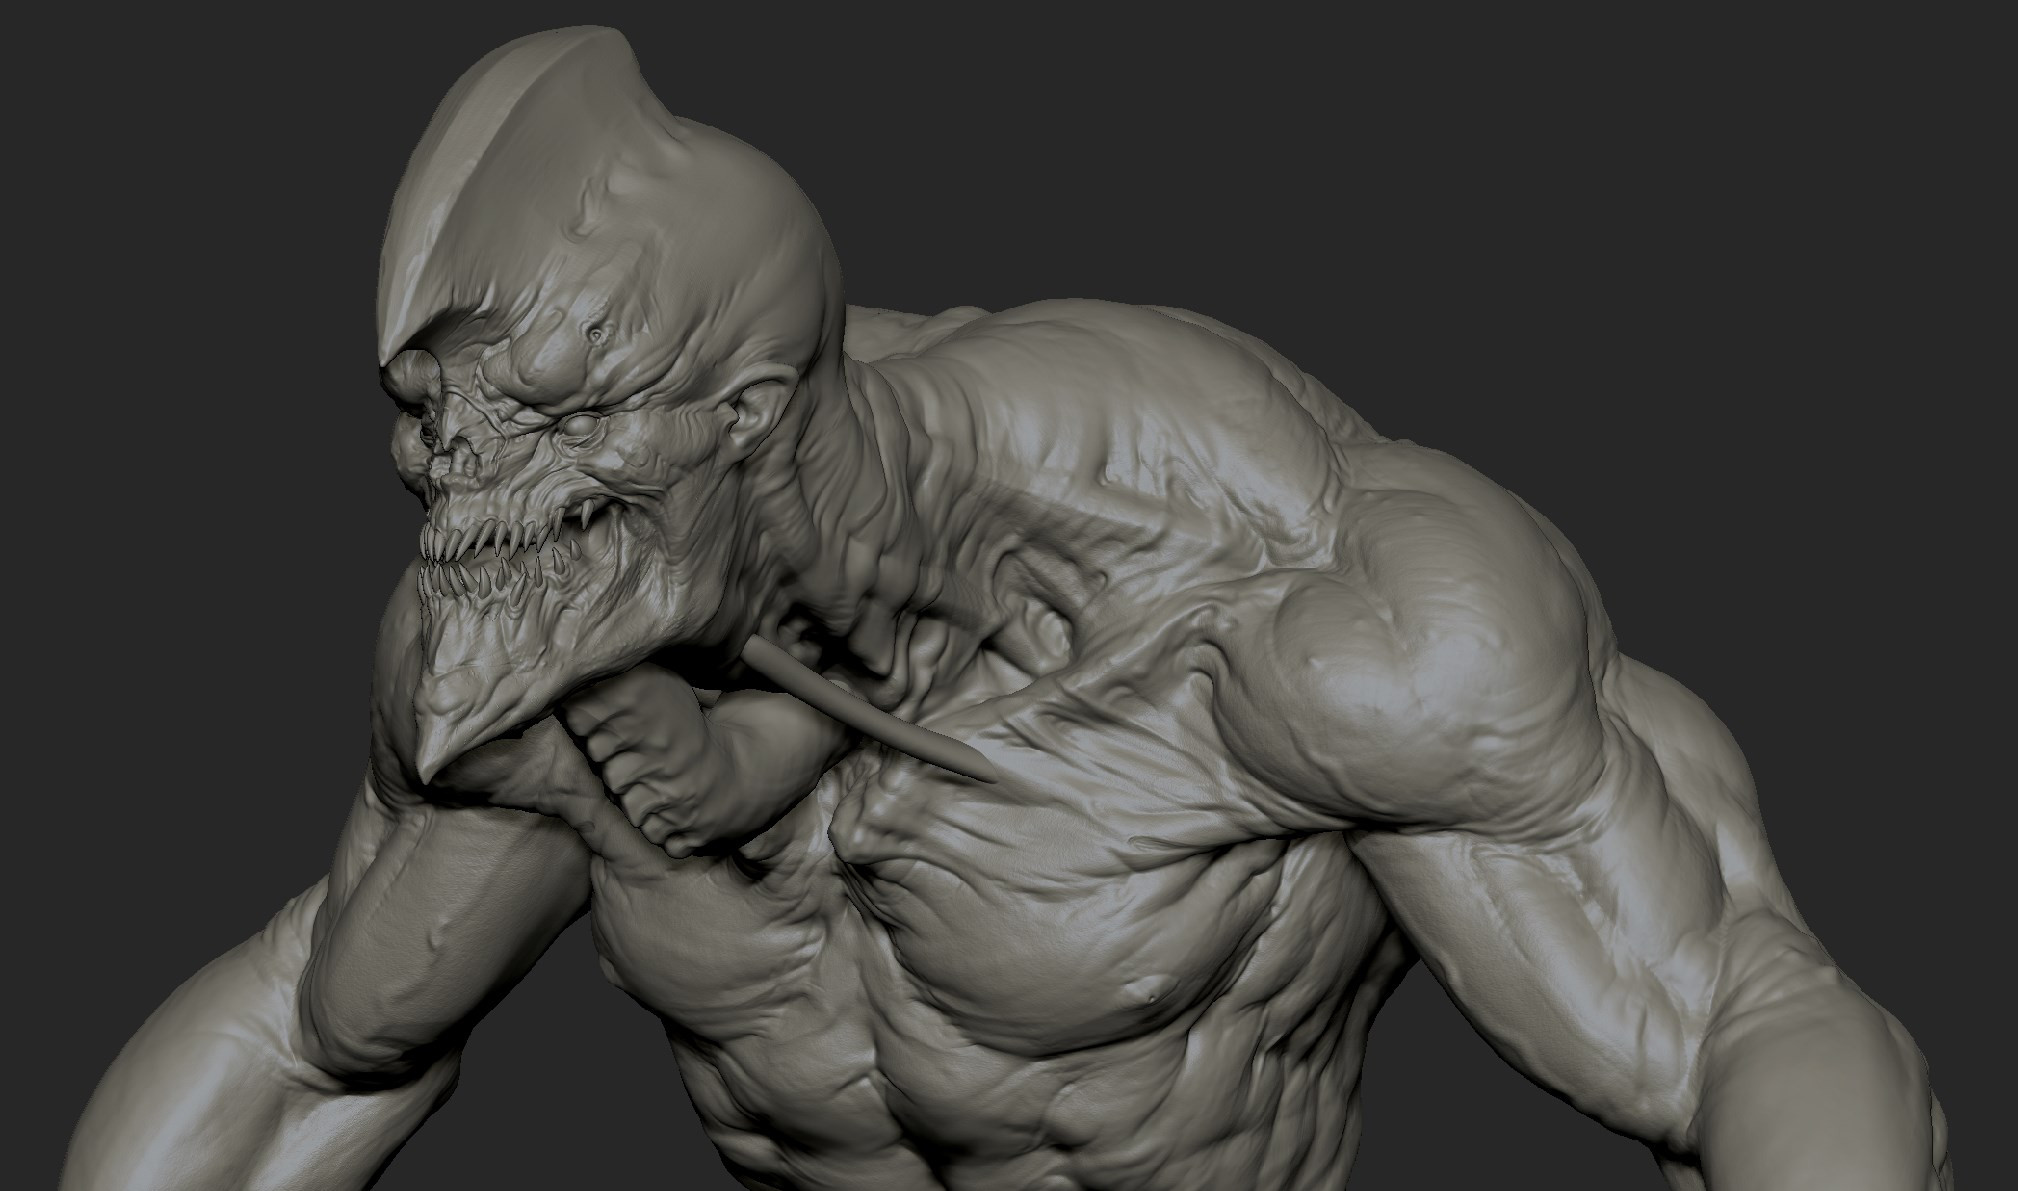 Pushing the detail further around the body.